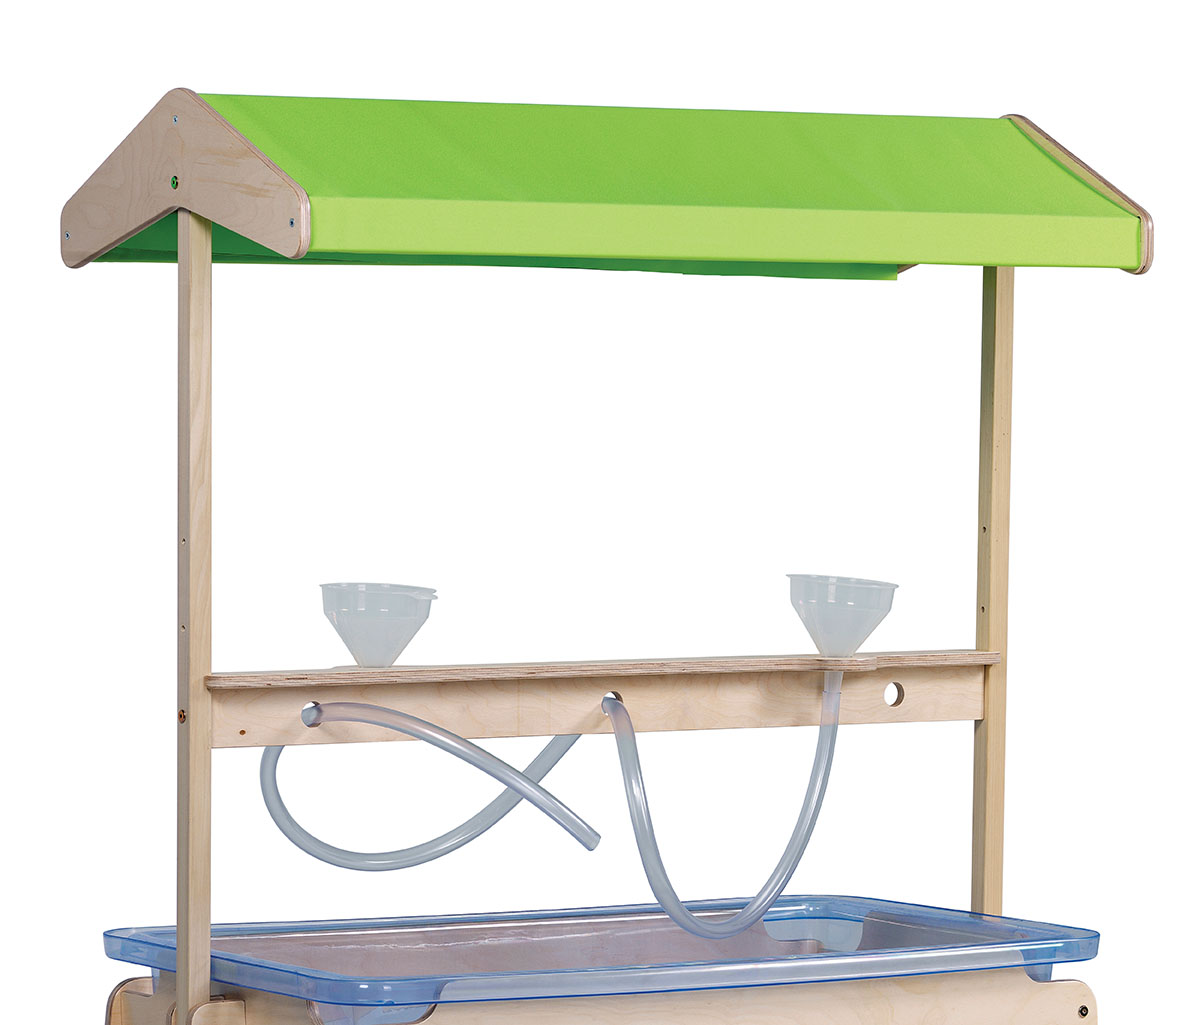 PT460-Millhouse-Early-Years-Furniture-Canopy-And-Accessory-Kit_Main_RGB.jpg